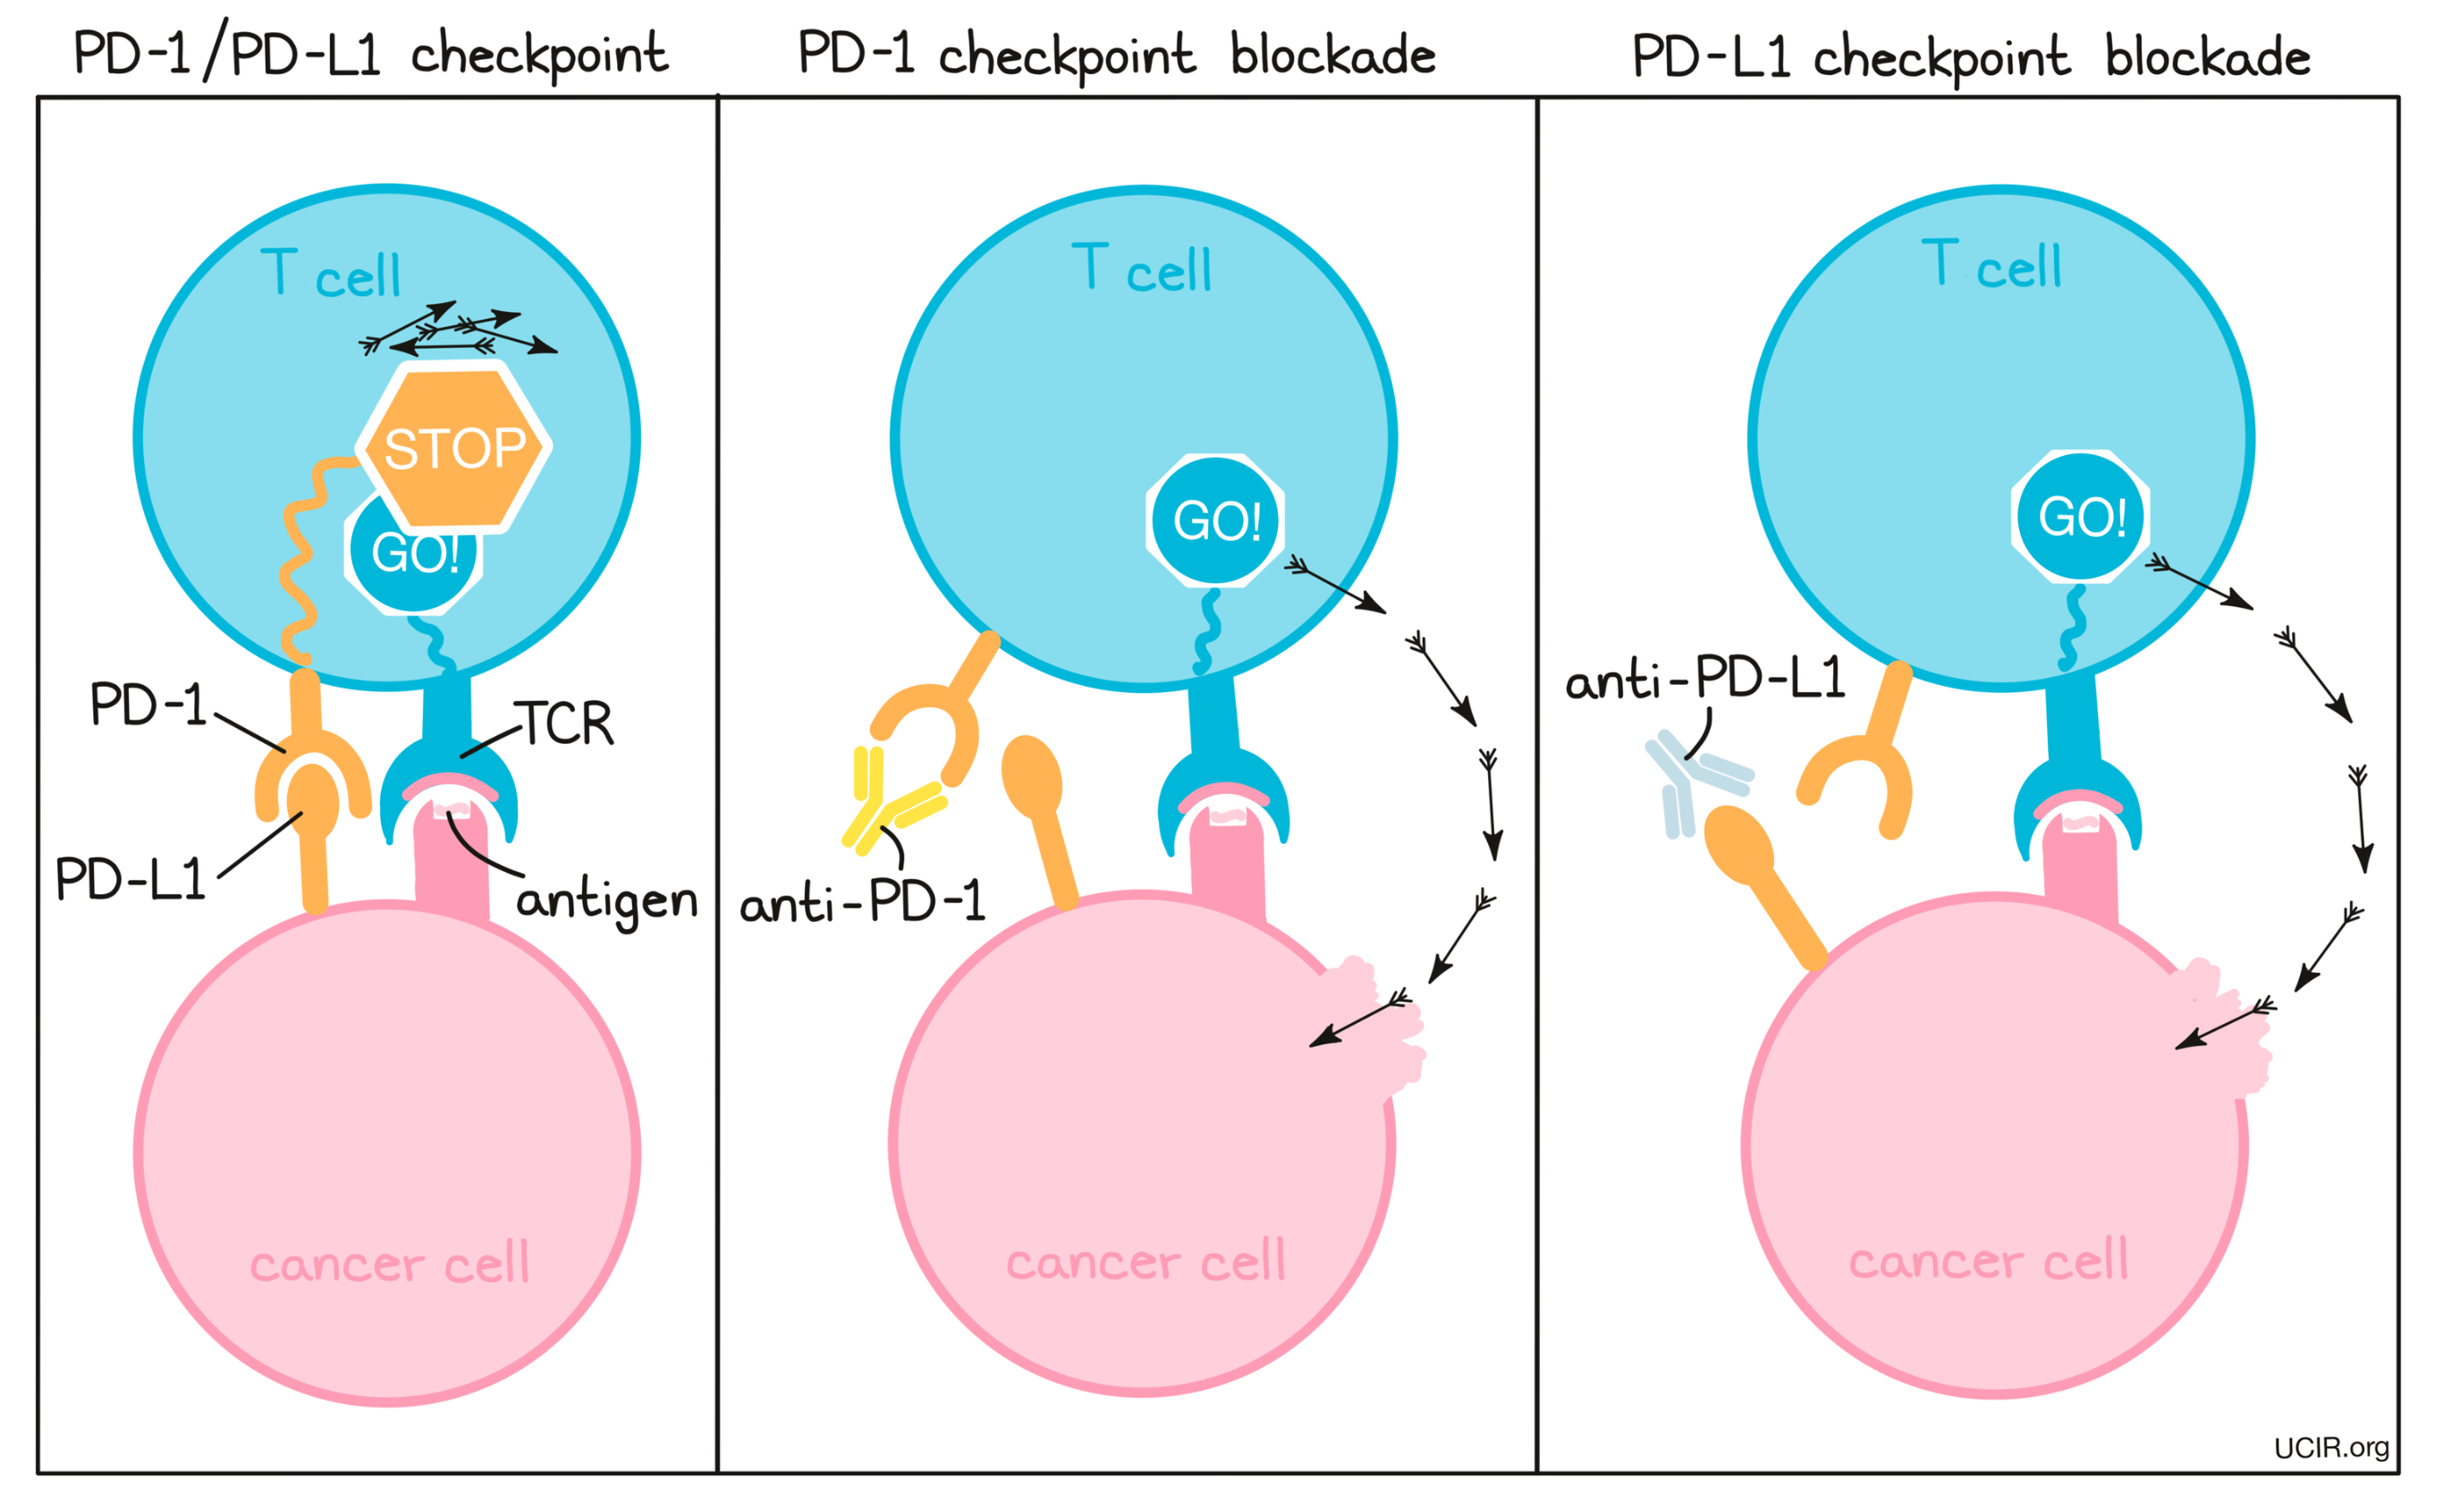 Illustration that shows the different between PD-1 and PD-L1 blockade